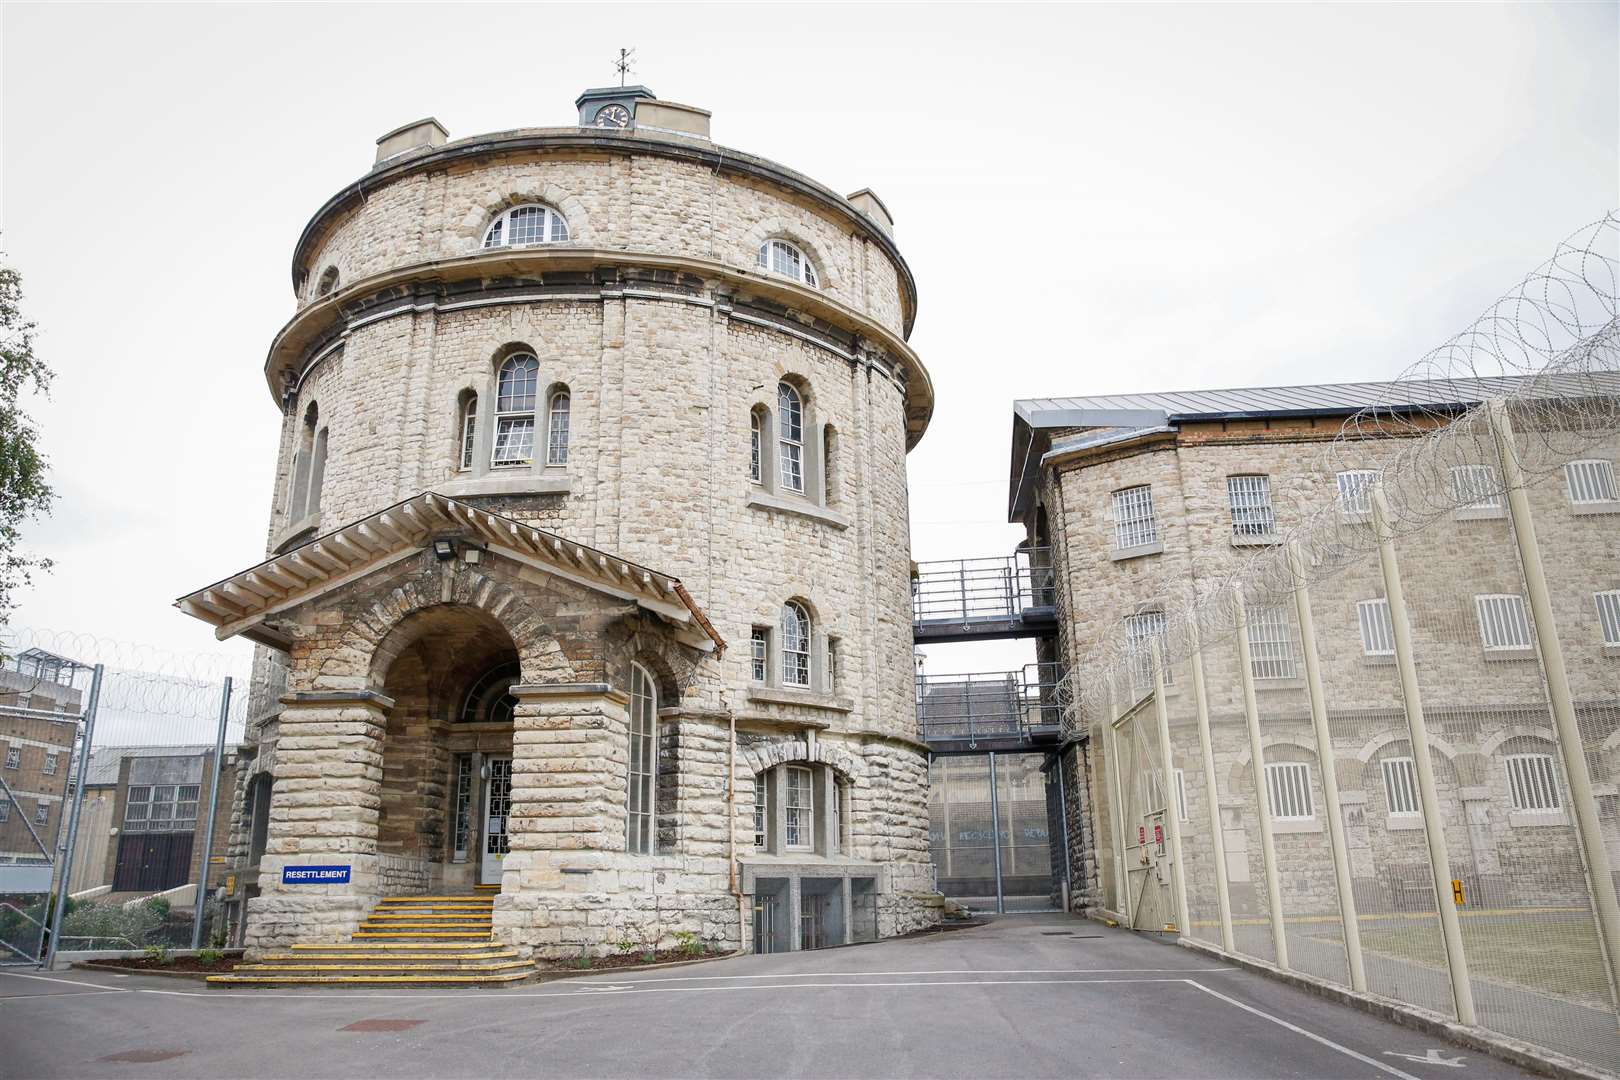 The Victorian prison has some anti-suicide cells, but Mr Cristea was not in one of them